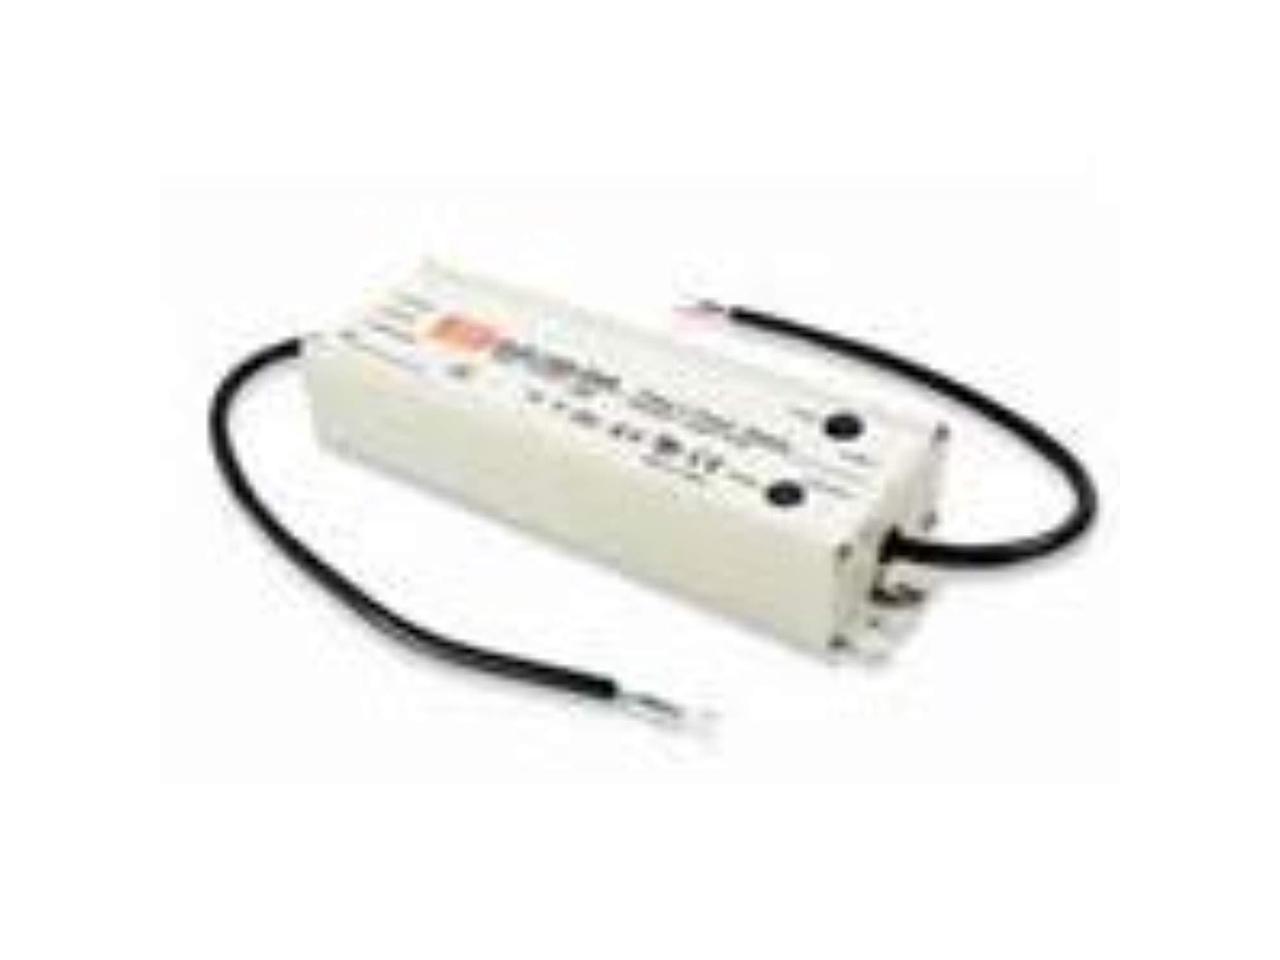 POWERNEX MEAN WELL NEW HLG-240H-54A 54V 4.45A 240W LED Driver Power Supply 